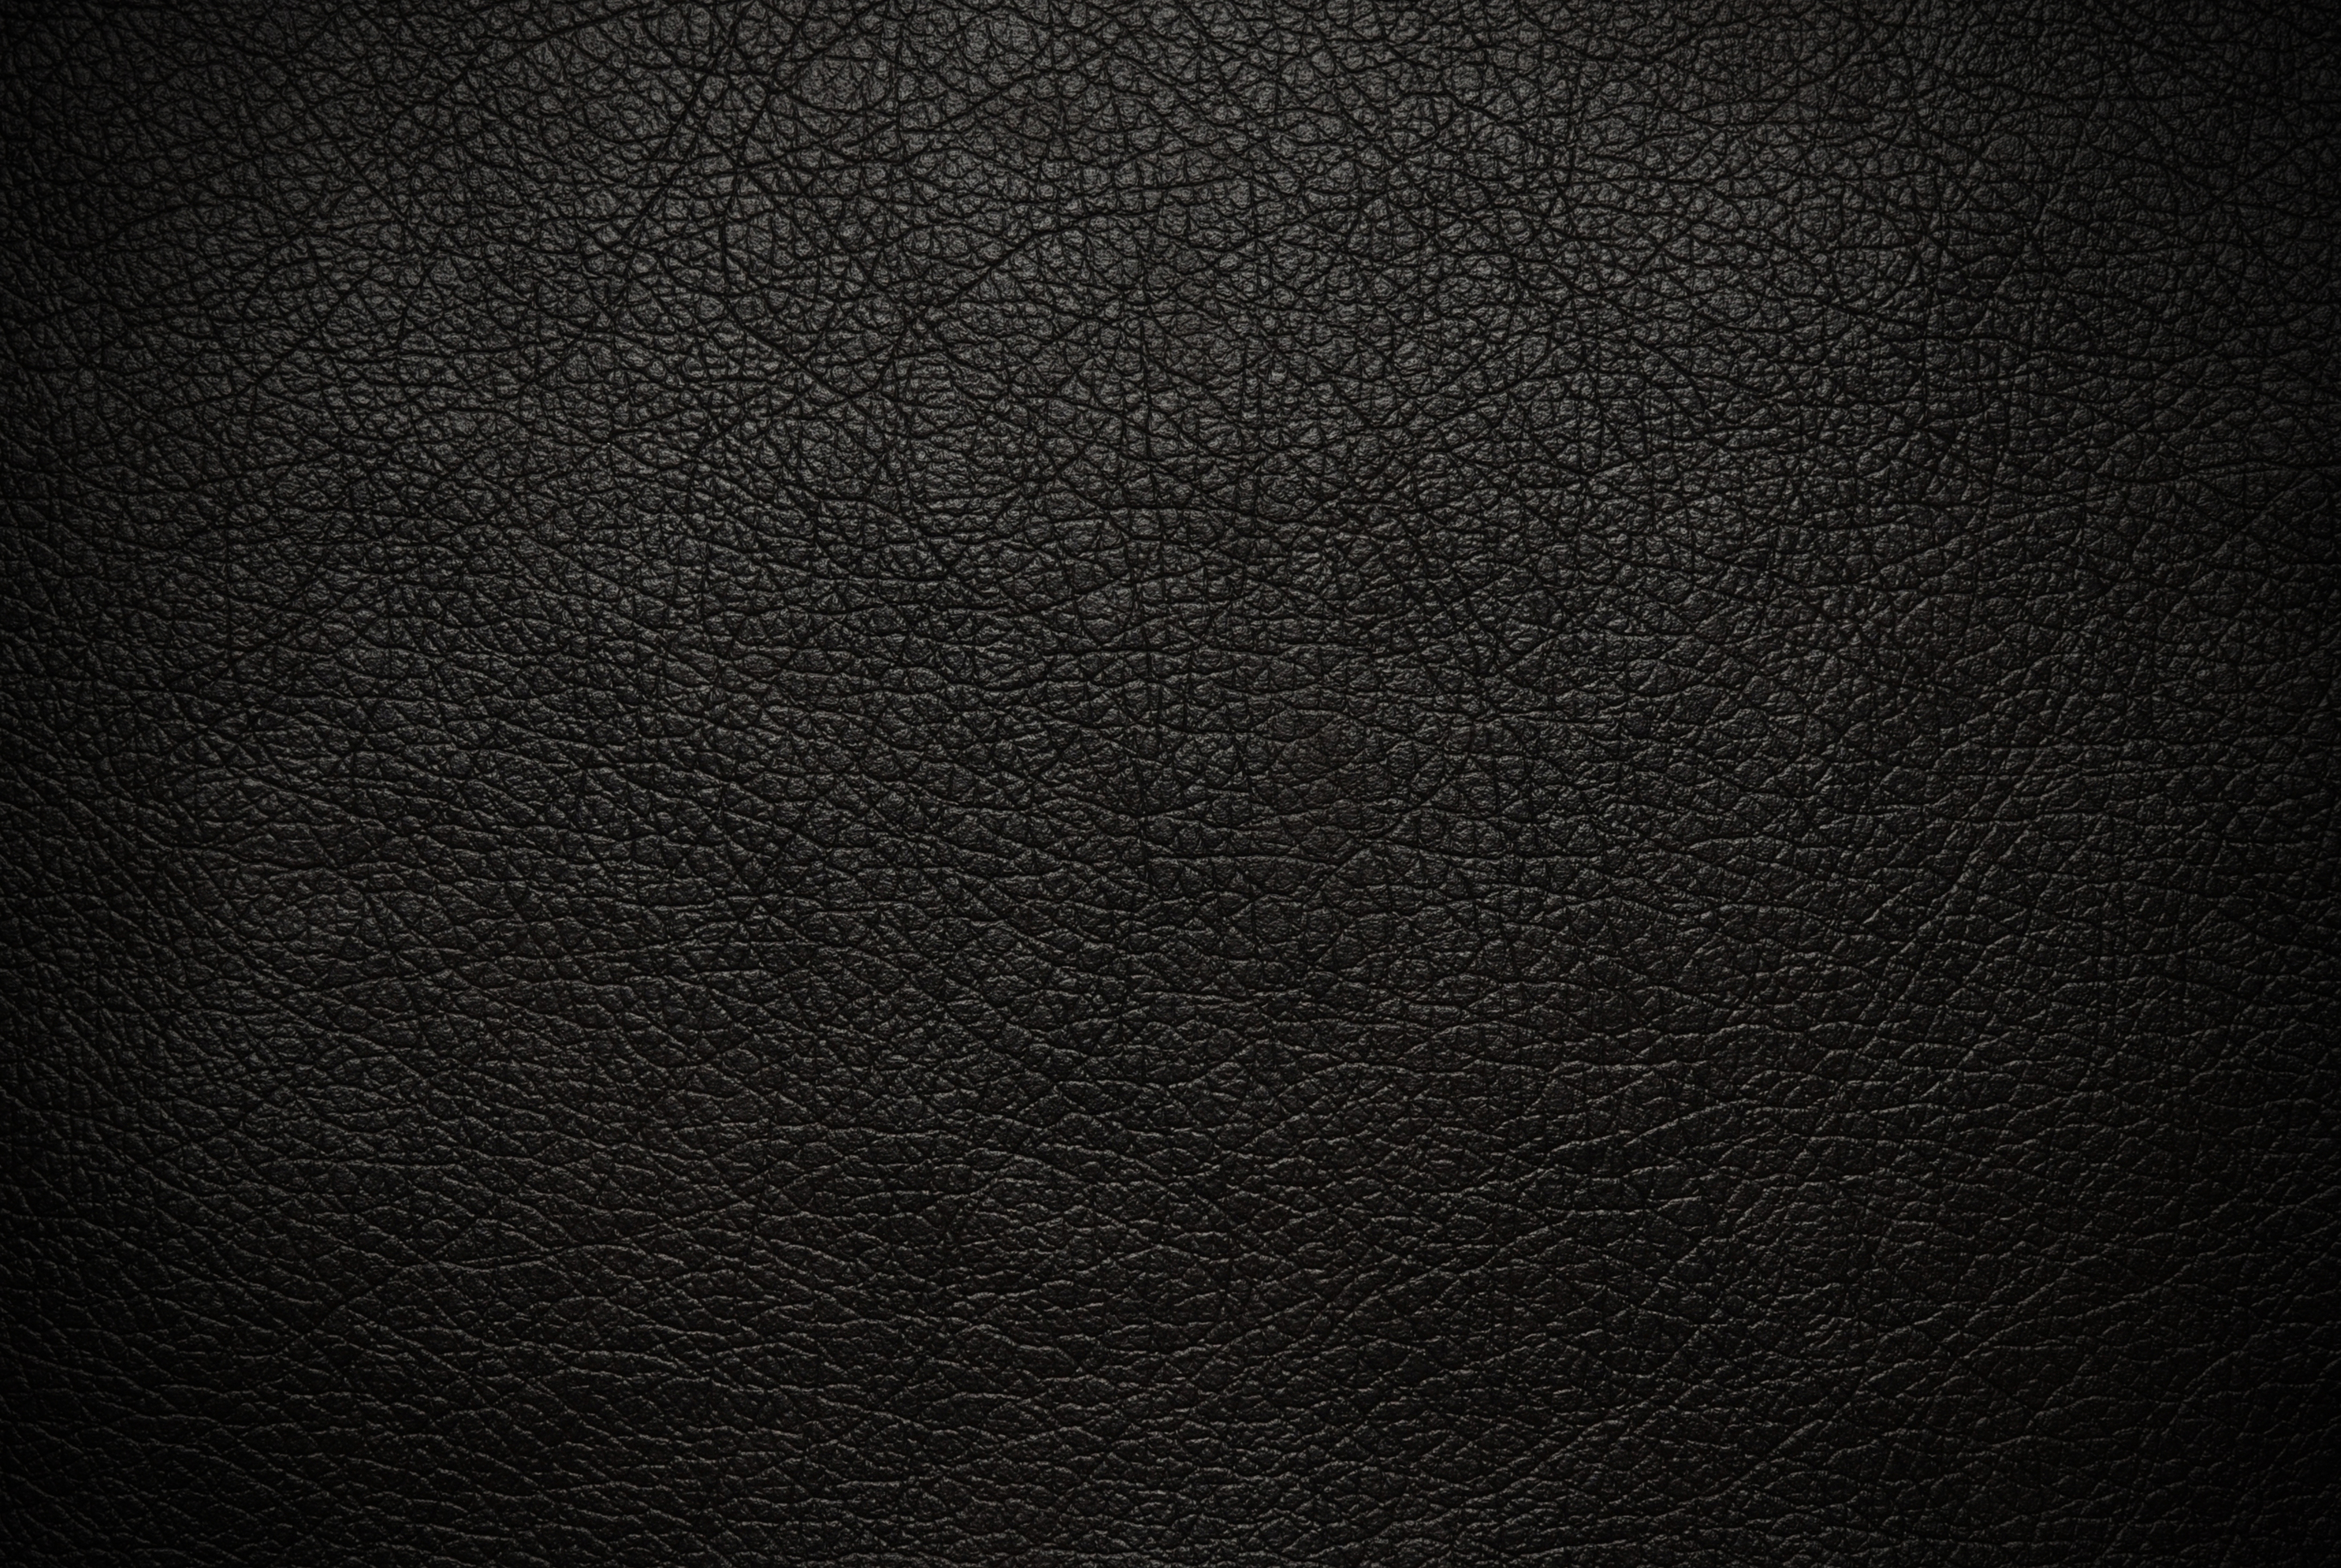 4K wallpaper   Textures   black background texture leather cracked 5000x3350